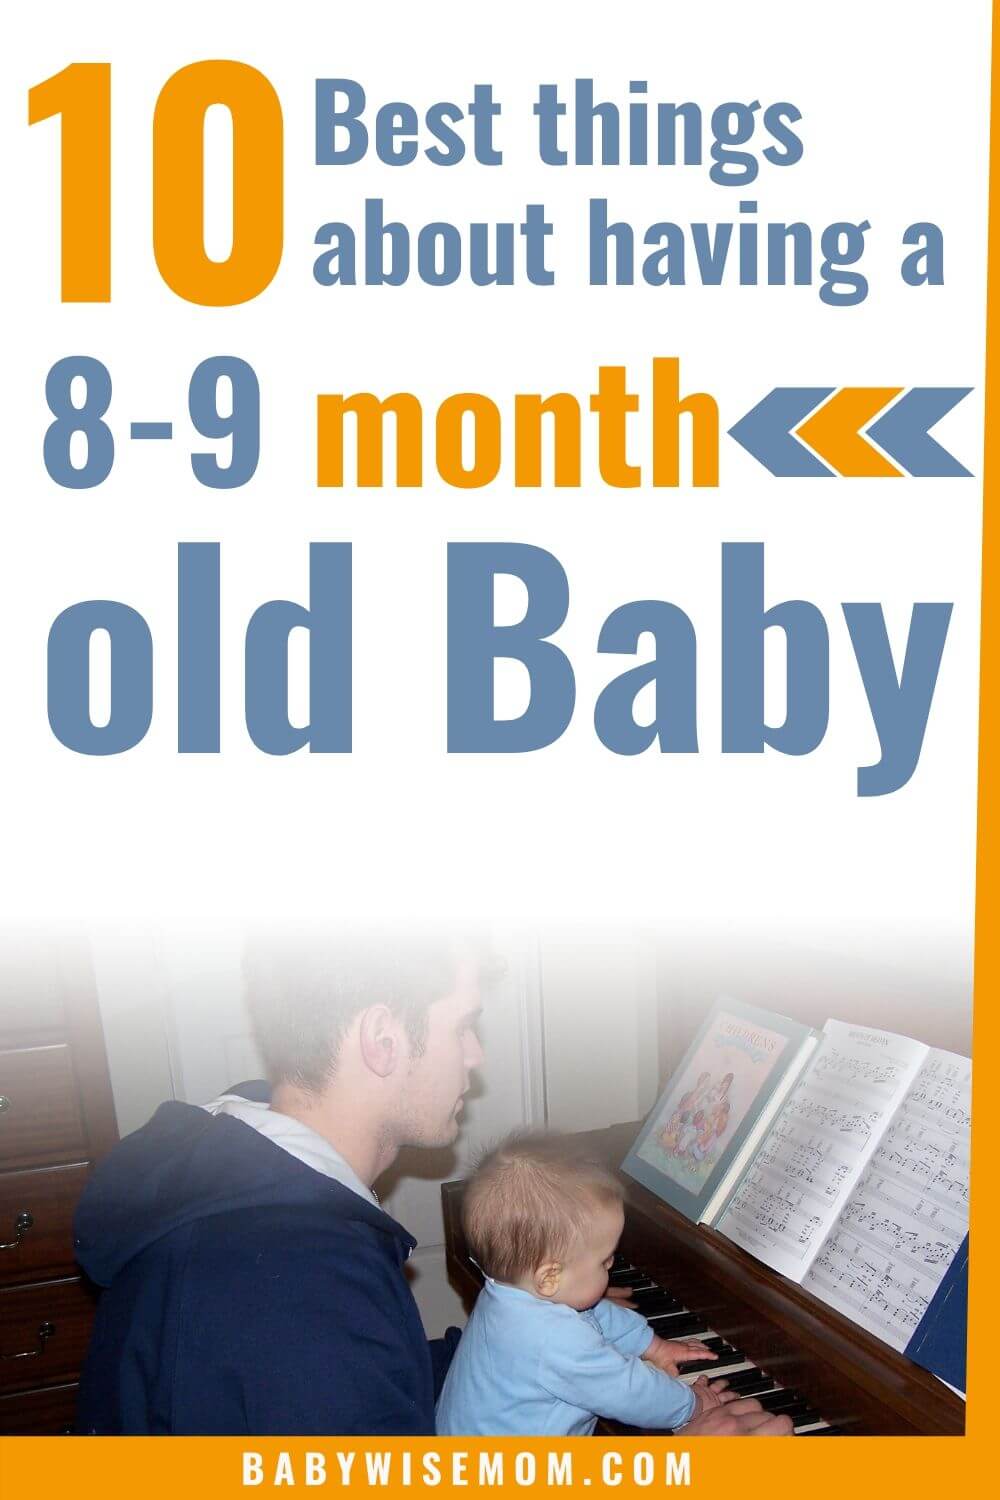 Best things about 8-9 month old baby